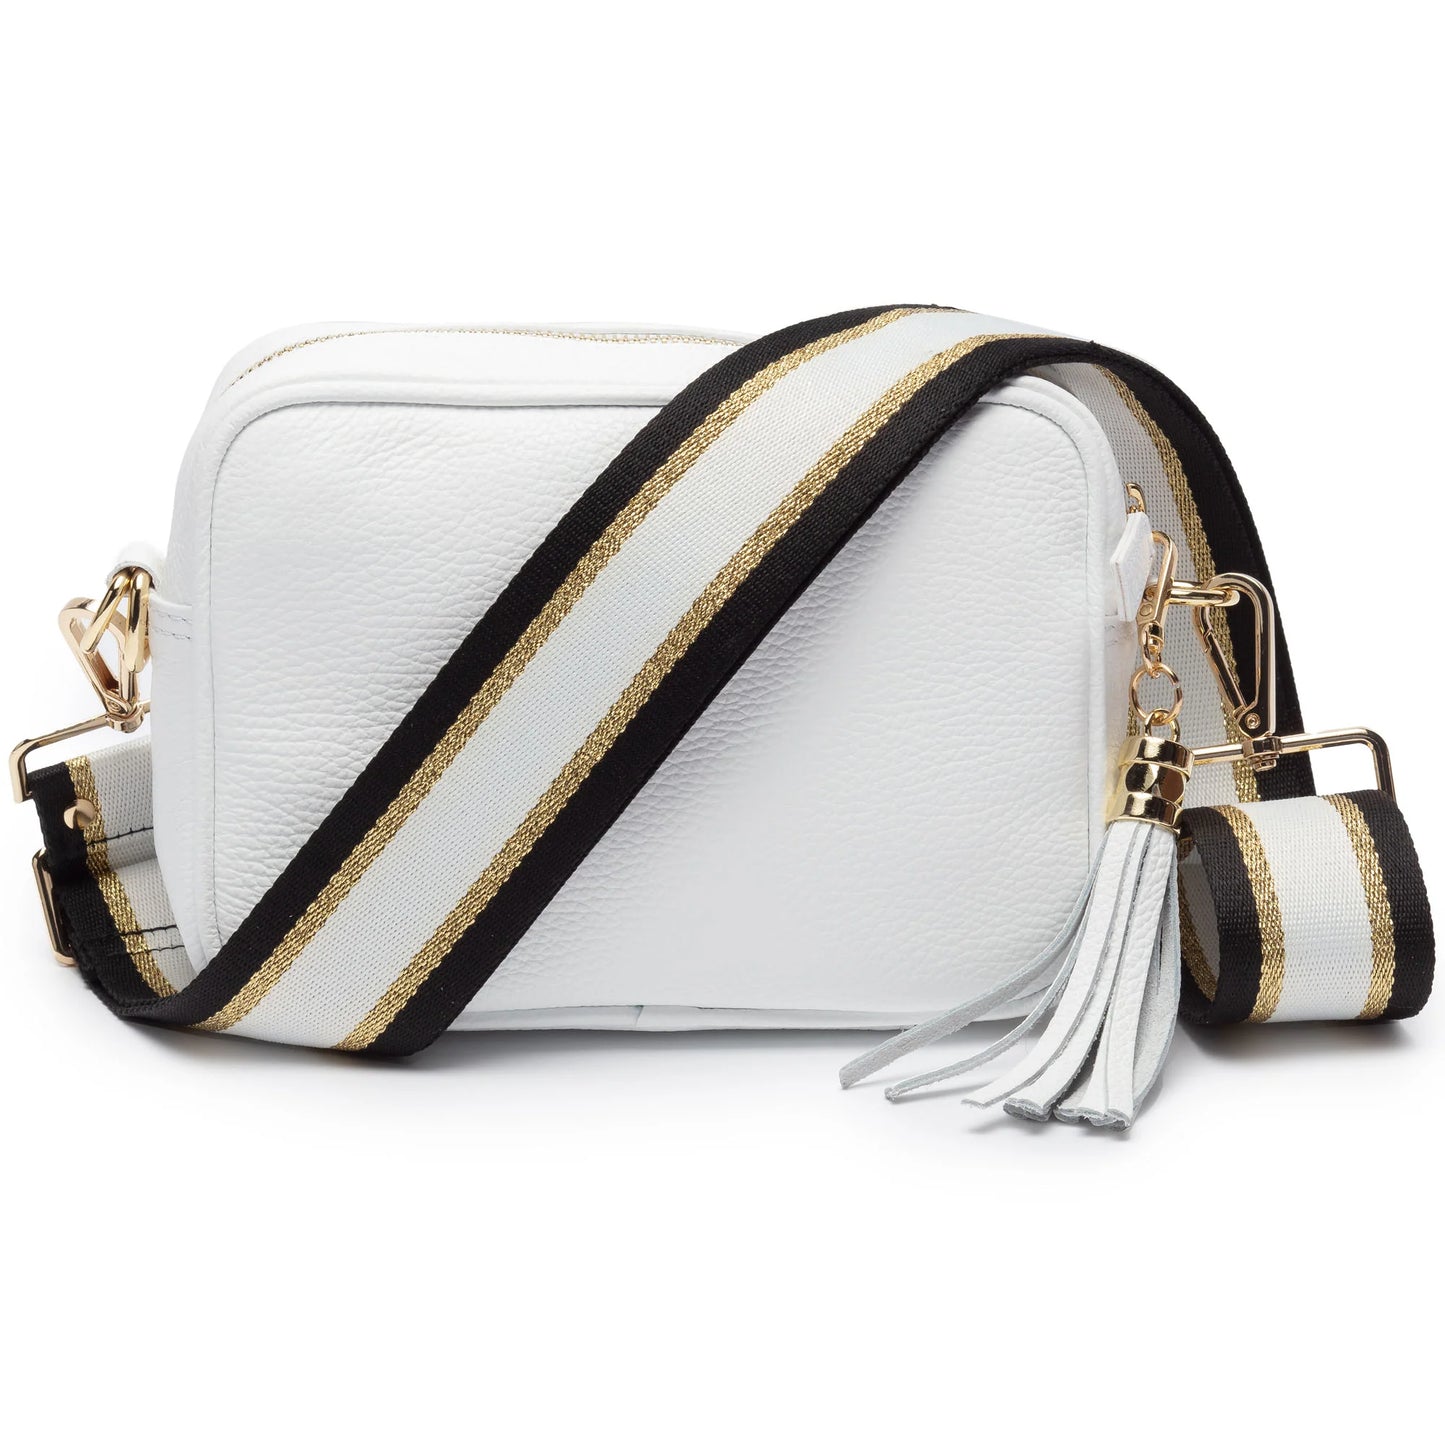 Elie Beaumont White Leather Crossbody Bag